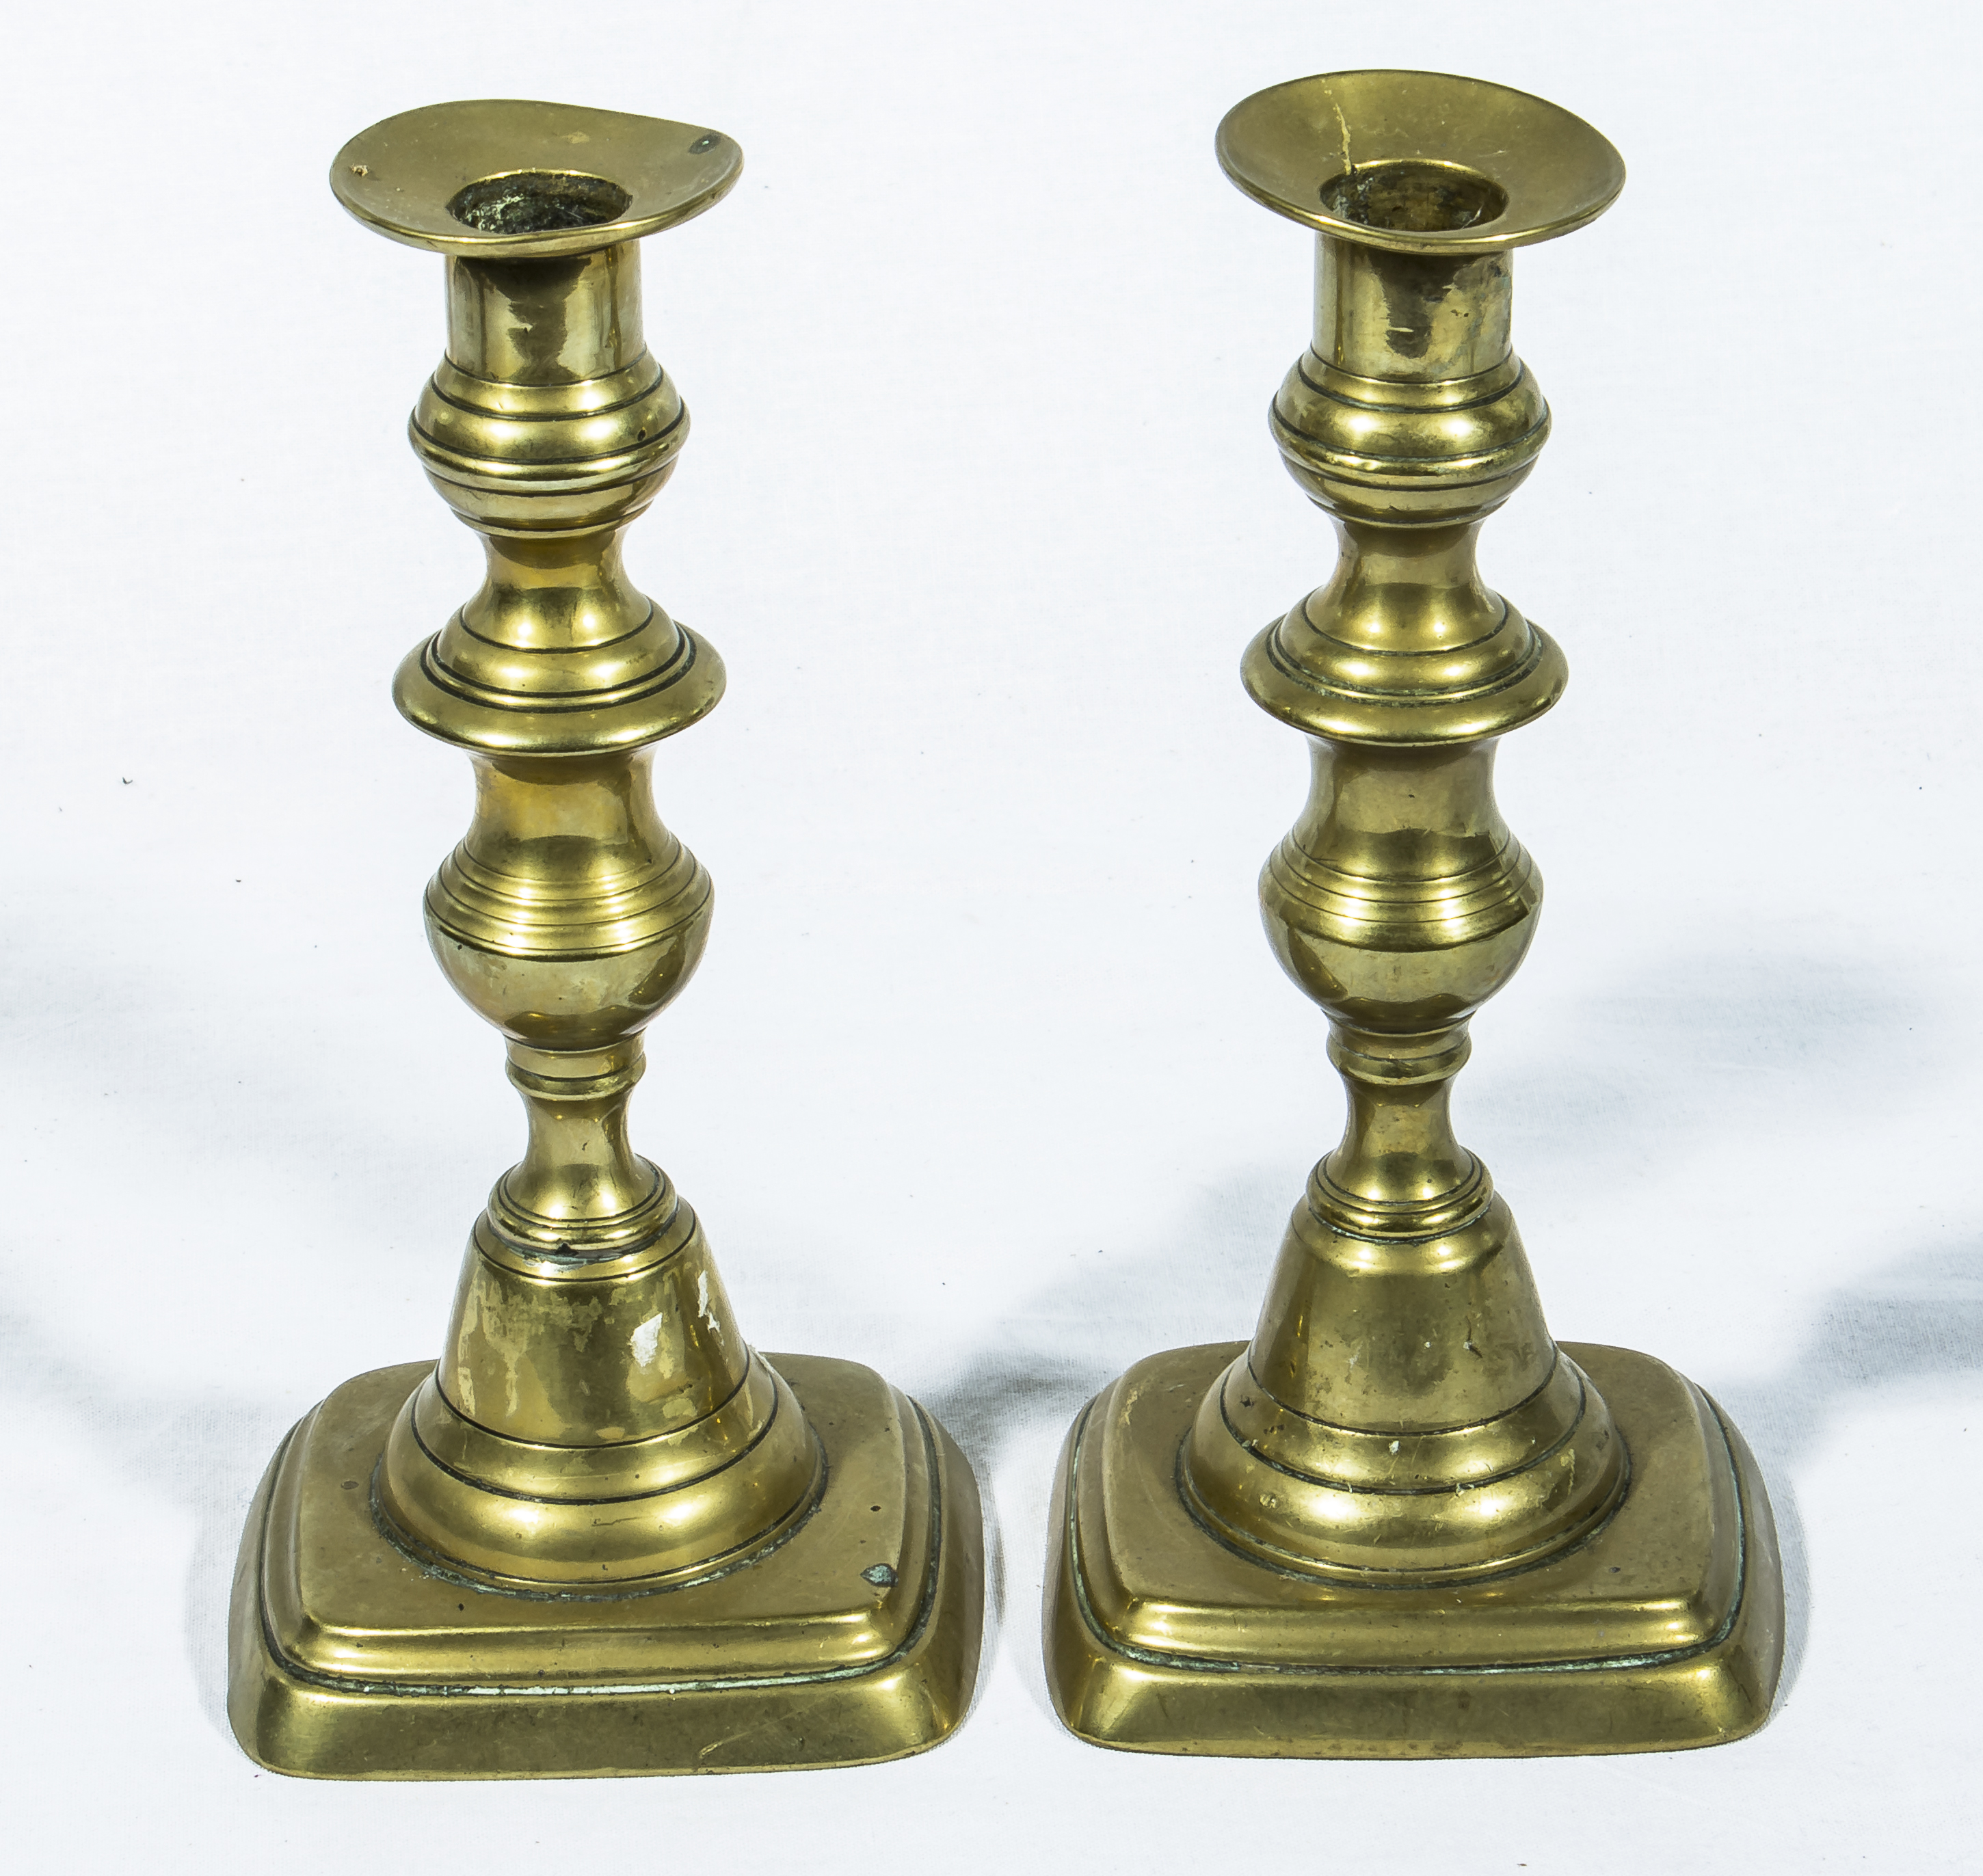 Two pairs of brass candlesticks - Image 3 of 3